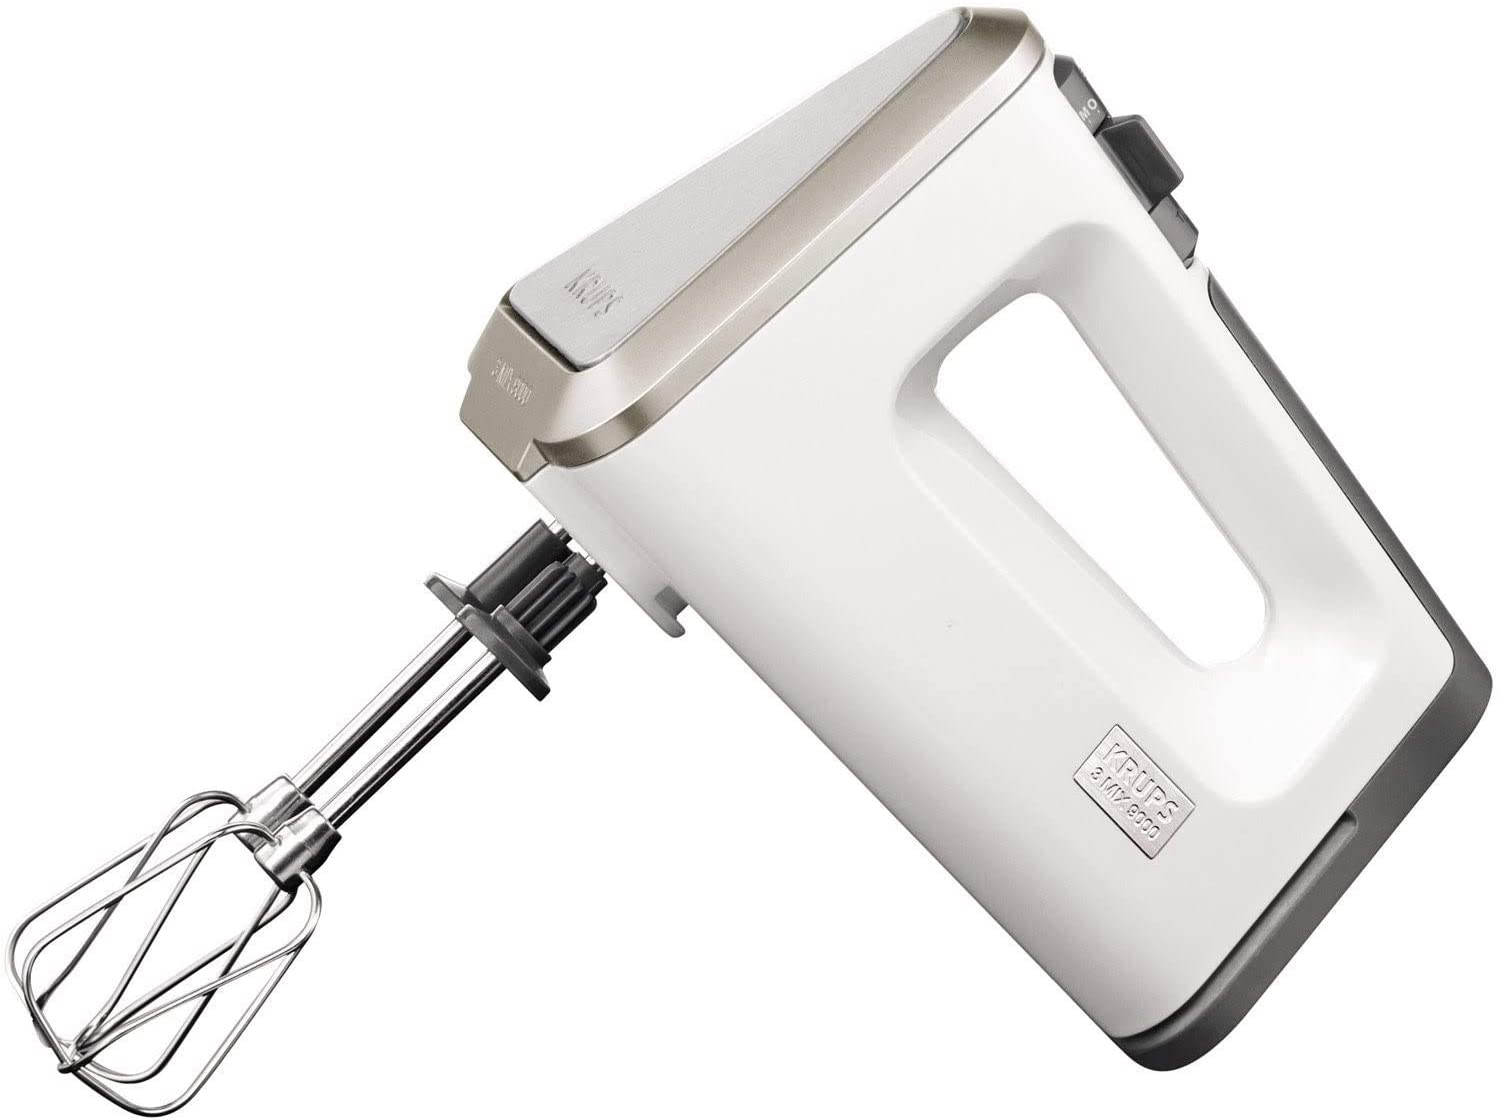 Krups Hand Blender 3 Mix 9000 Deluxe Quick Mixing Rod GN 9031 Silver/White Stainless Steel Attachments Rear Made of High-Quality Santoprene Plastic Steplessly Adjustable/Turbo Function Kneading/Puriating/Stirringing/Chopping 3 Mix 9000